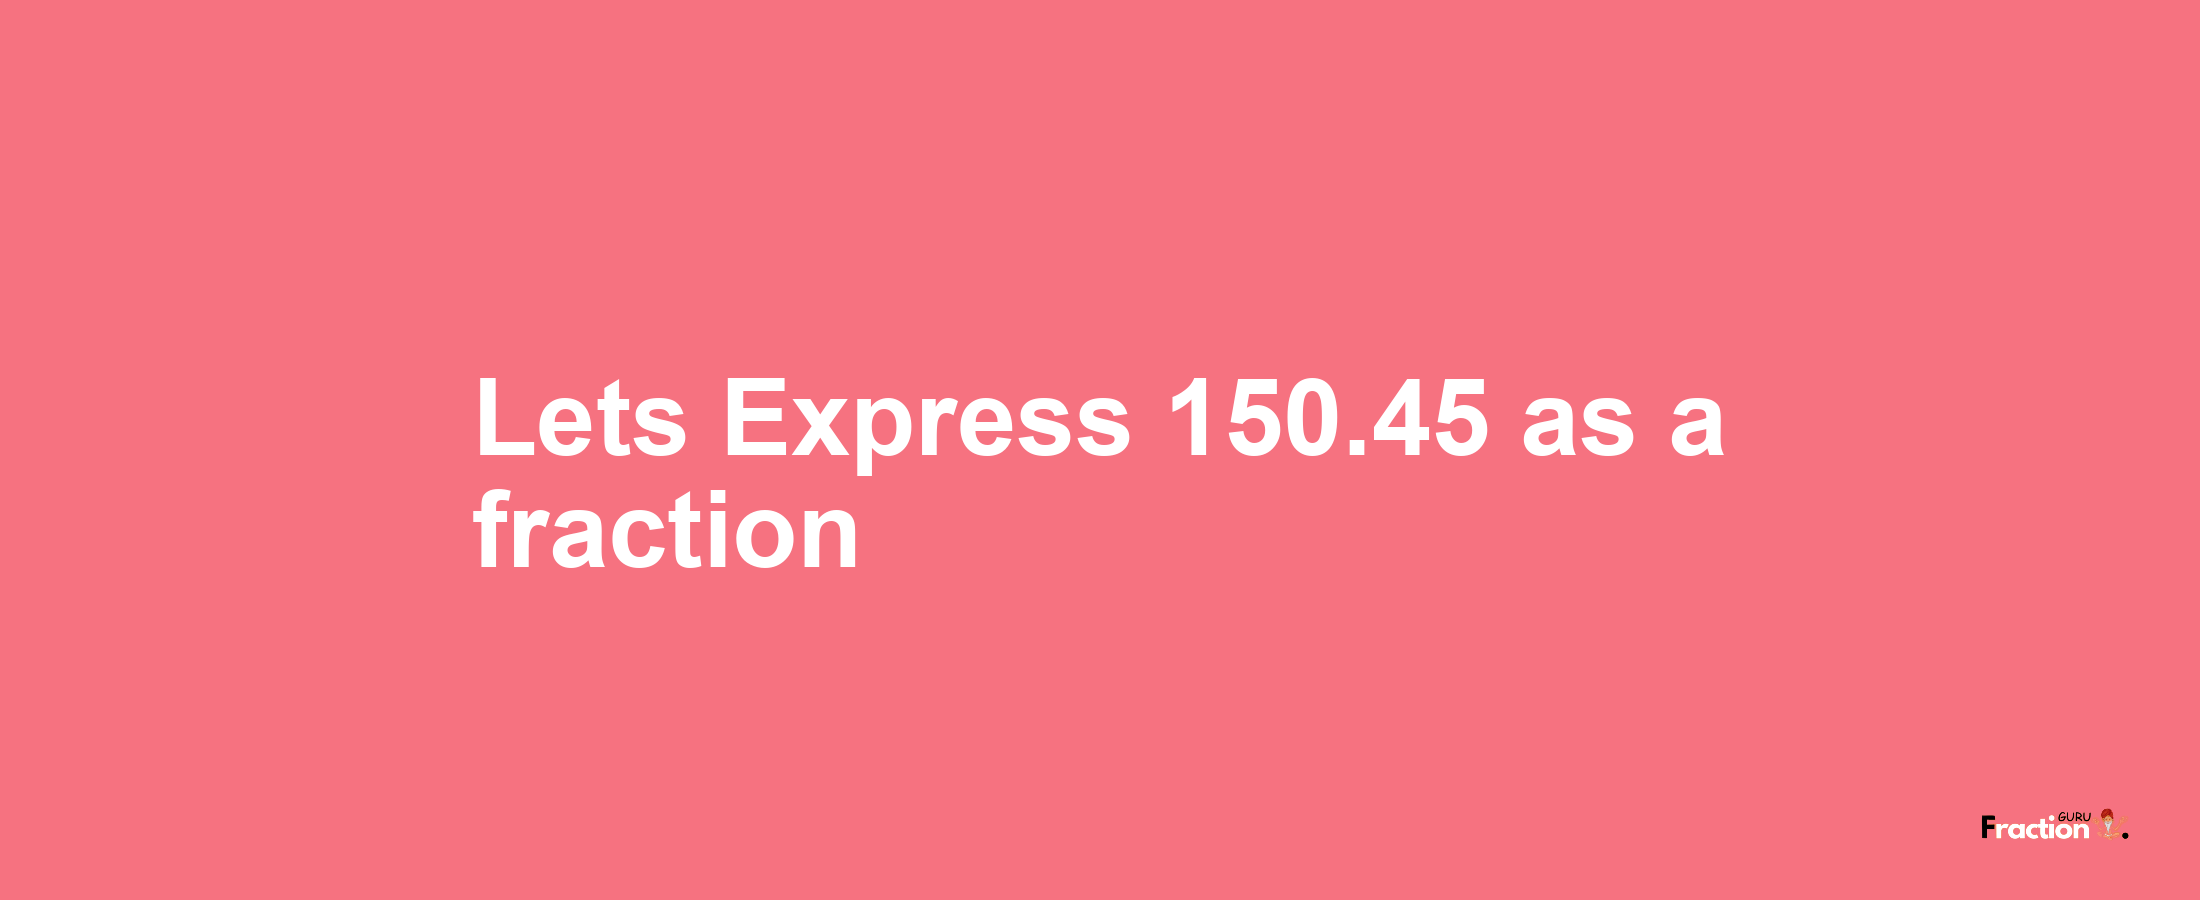 Lets Express 150.45 as afraction